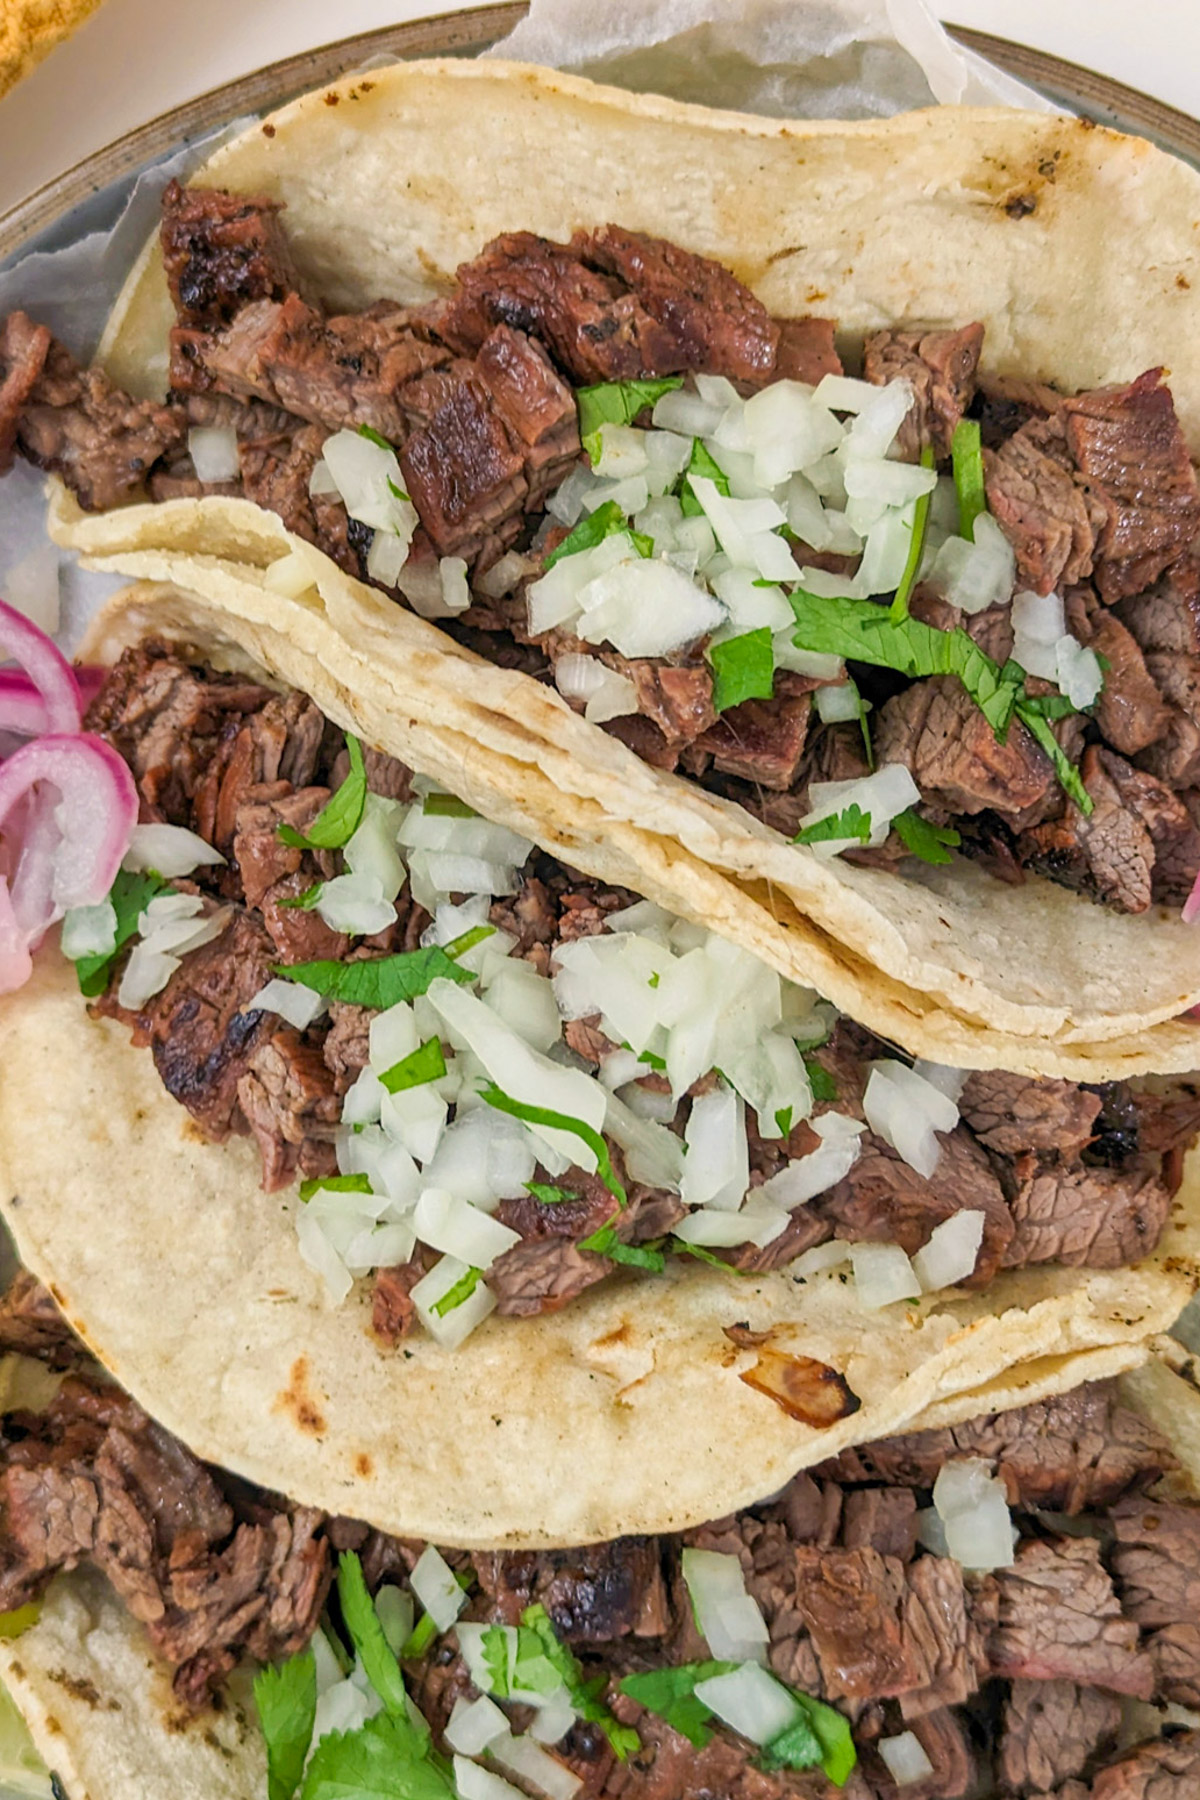 Three carne asada tacos with toppings.